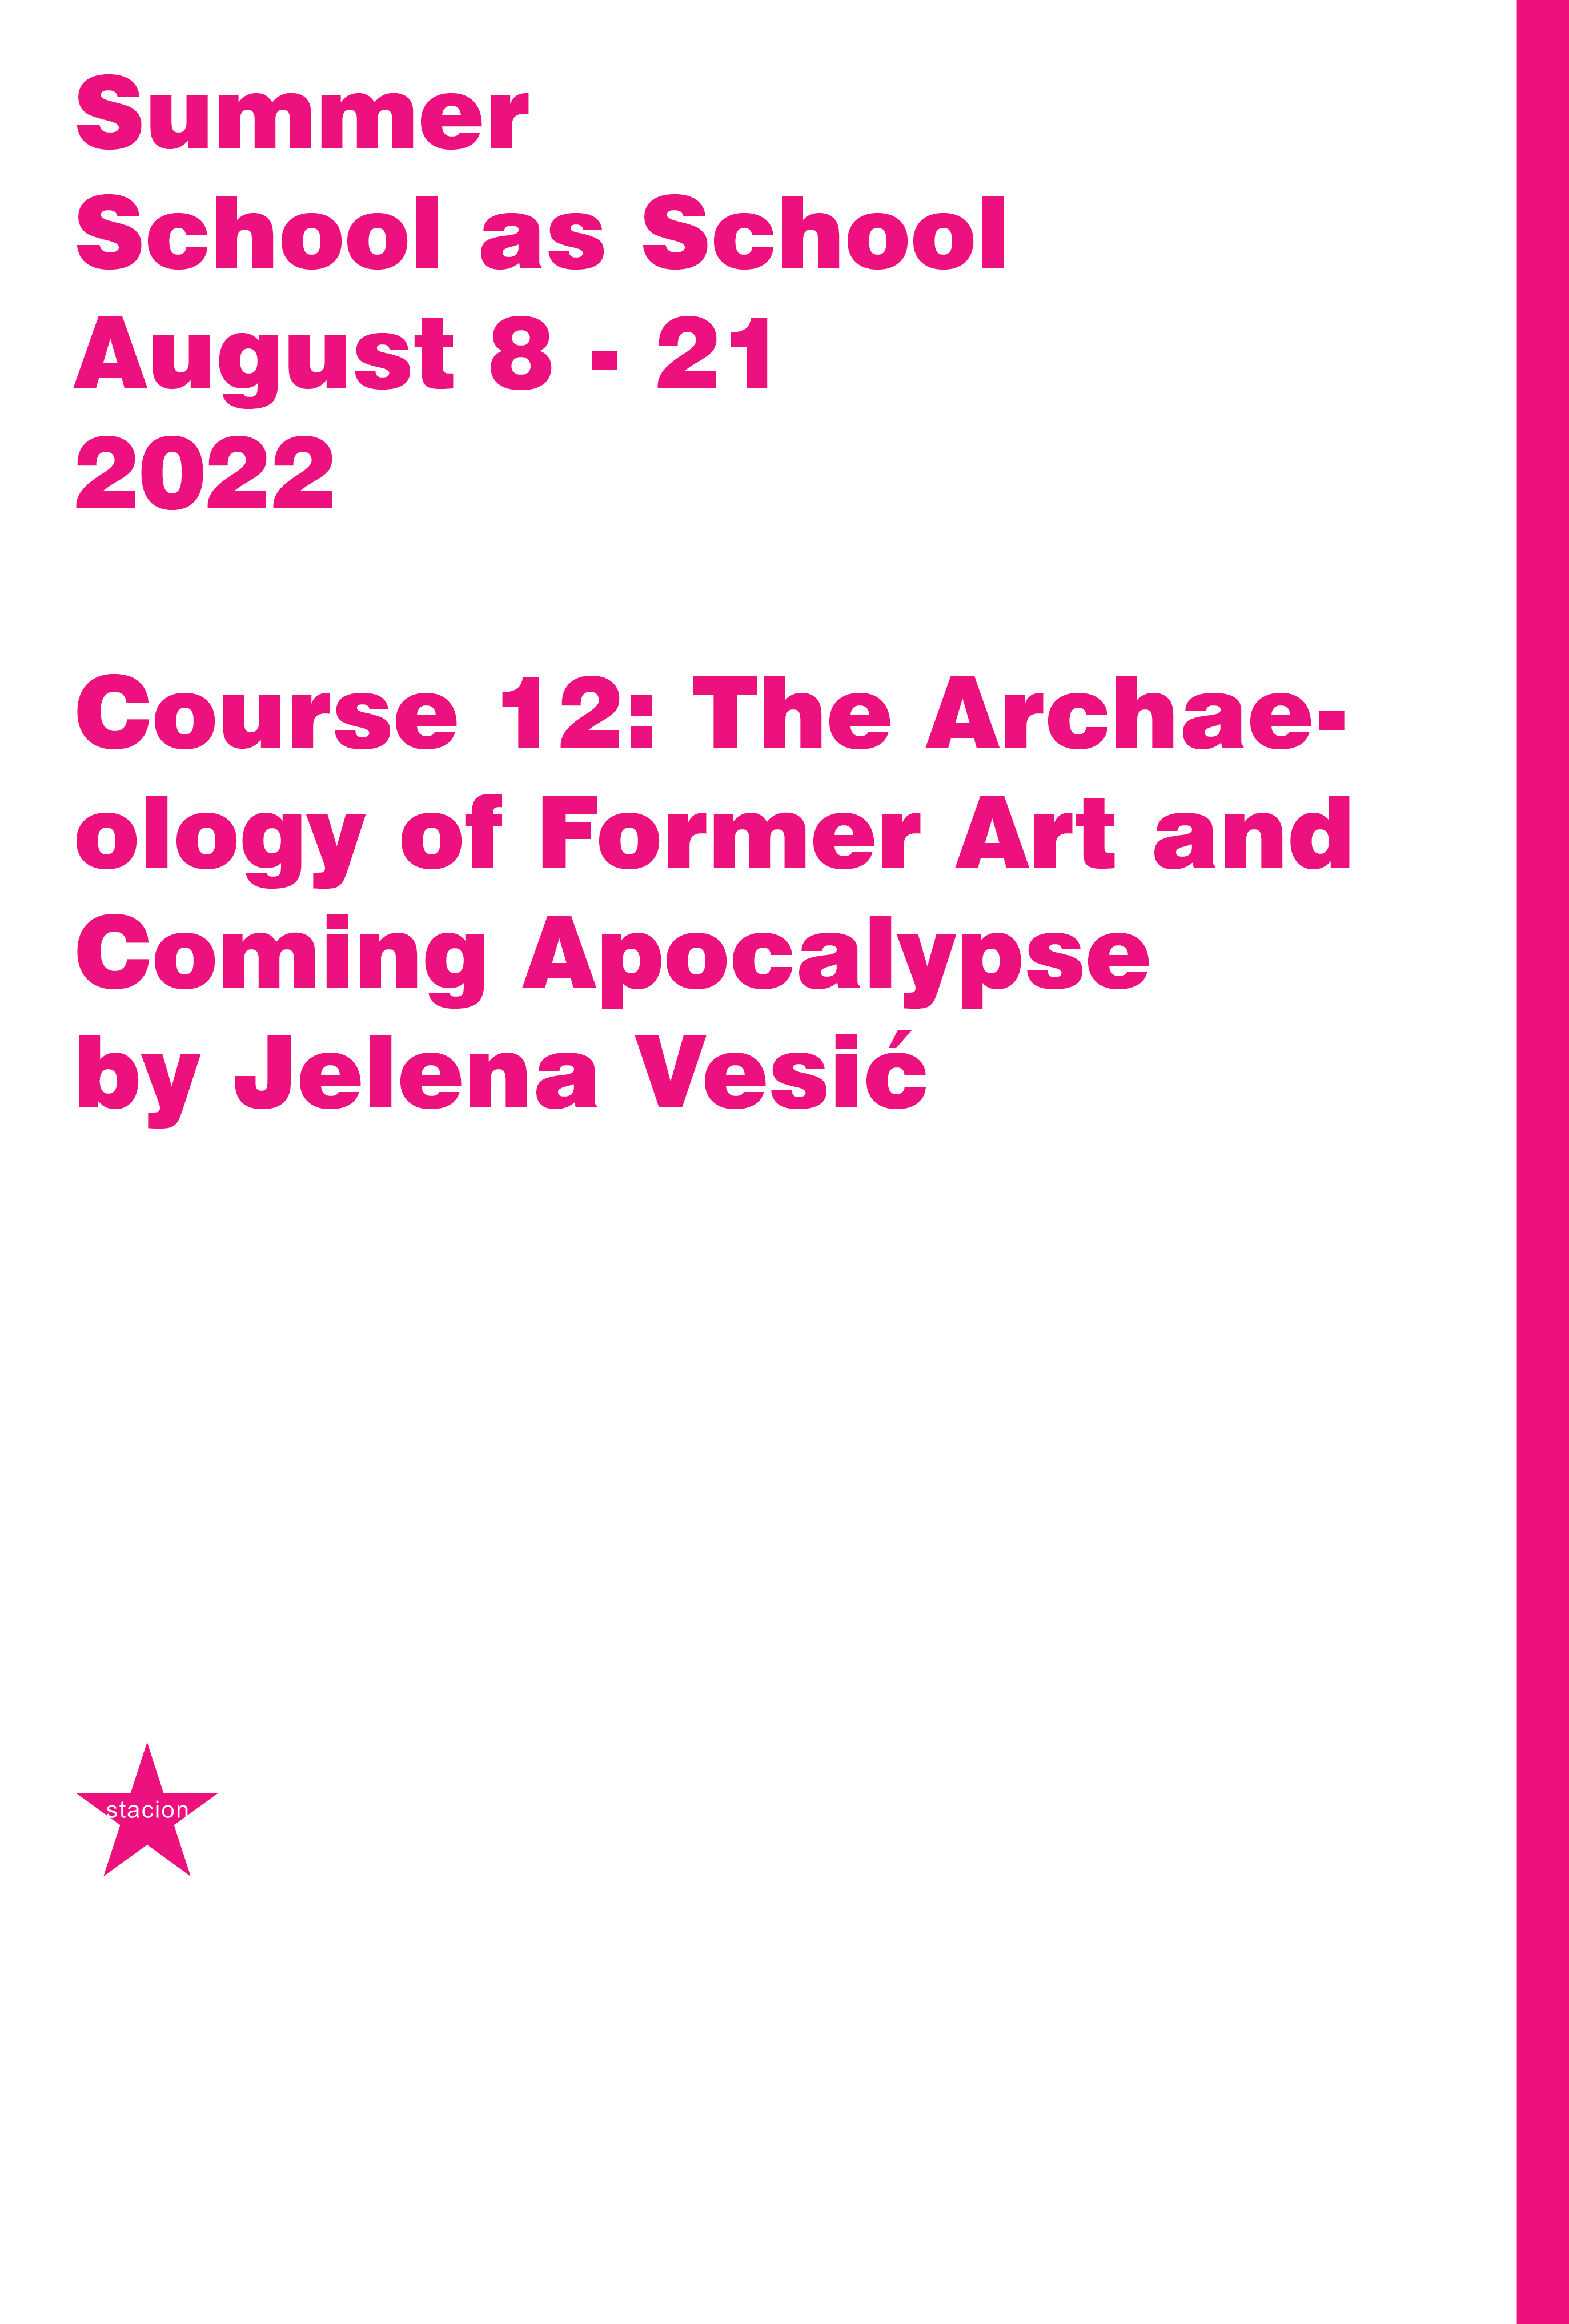 Course 12: The Archaeology of Former Art and Coming Apocalypse